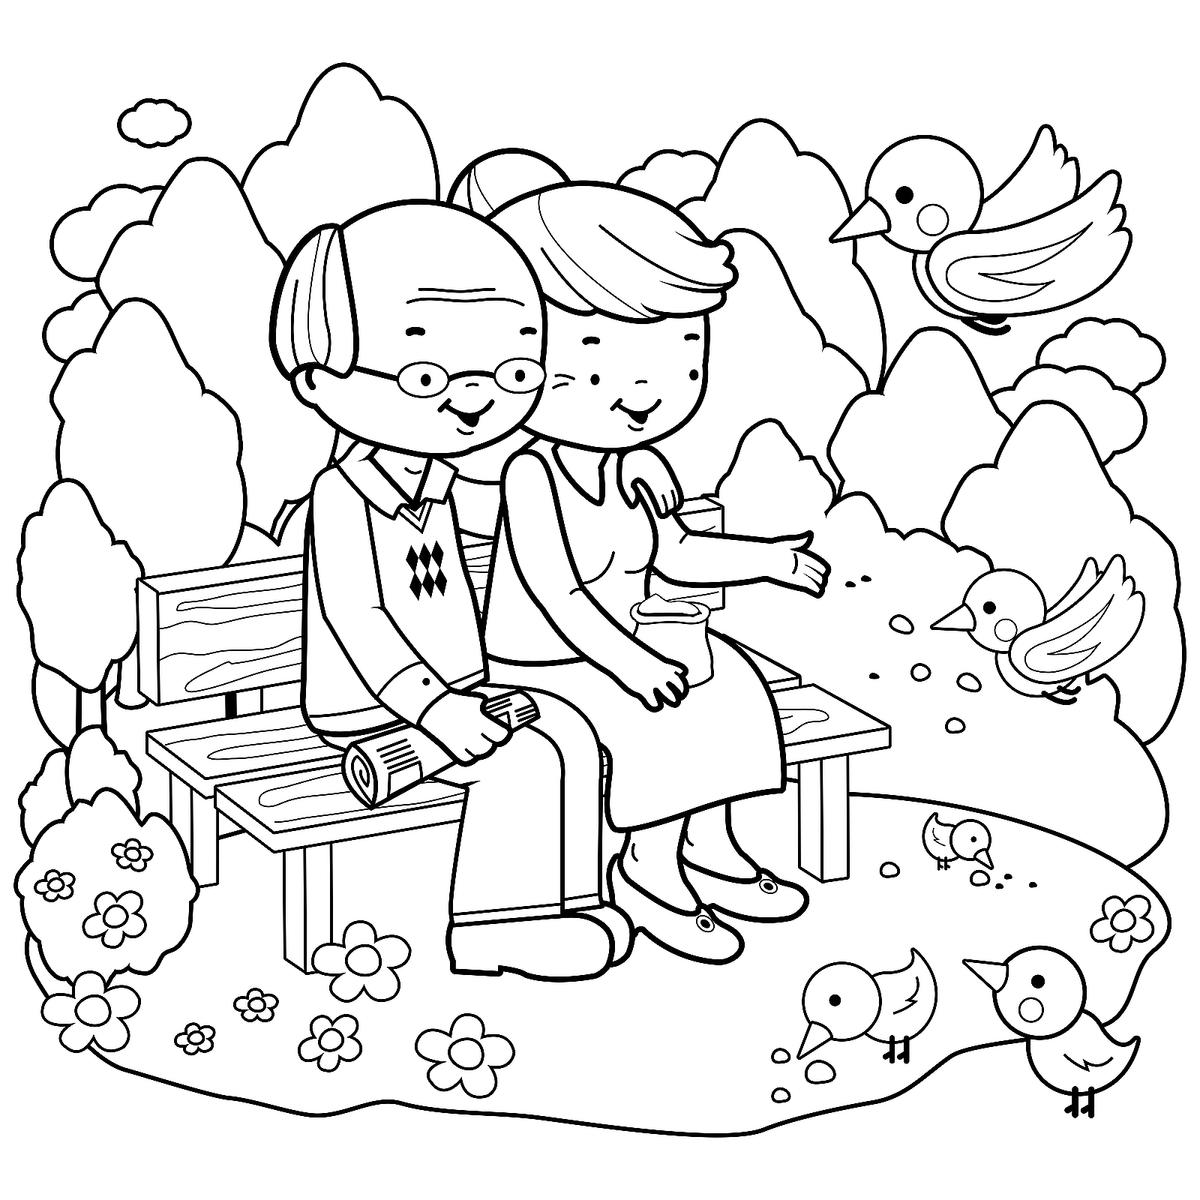 Grandparents coloring pages free fun printable coloring pages of grandmas grandpas for kids printables mom